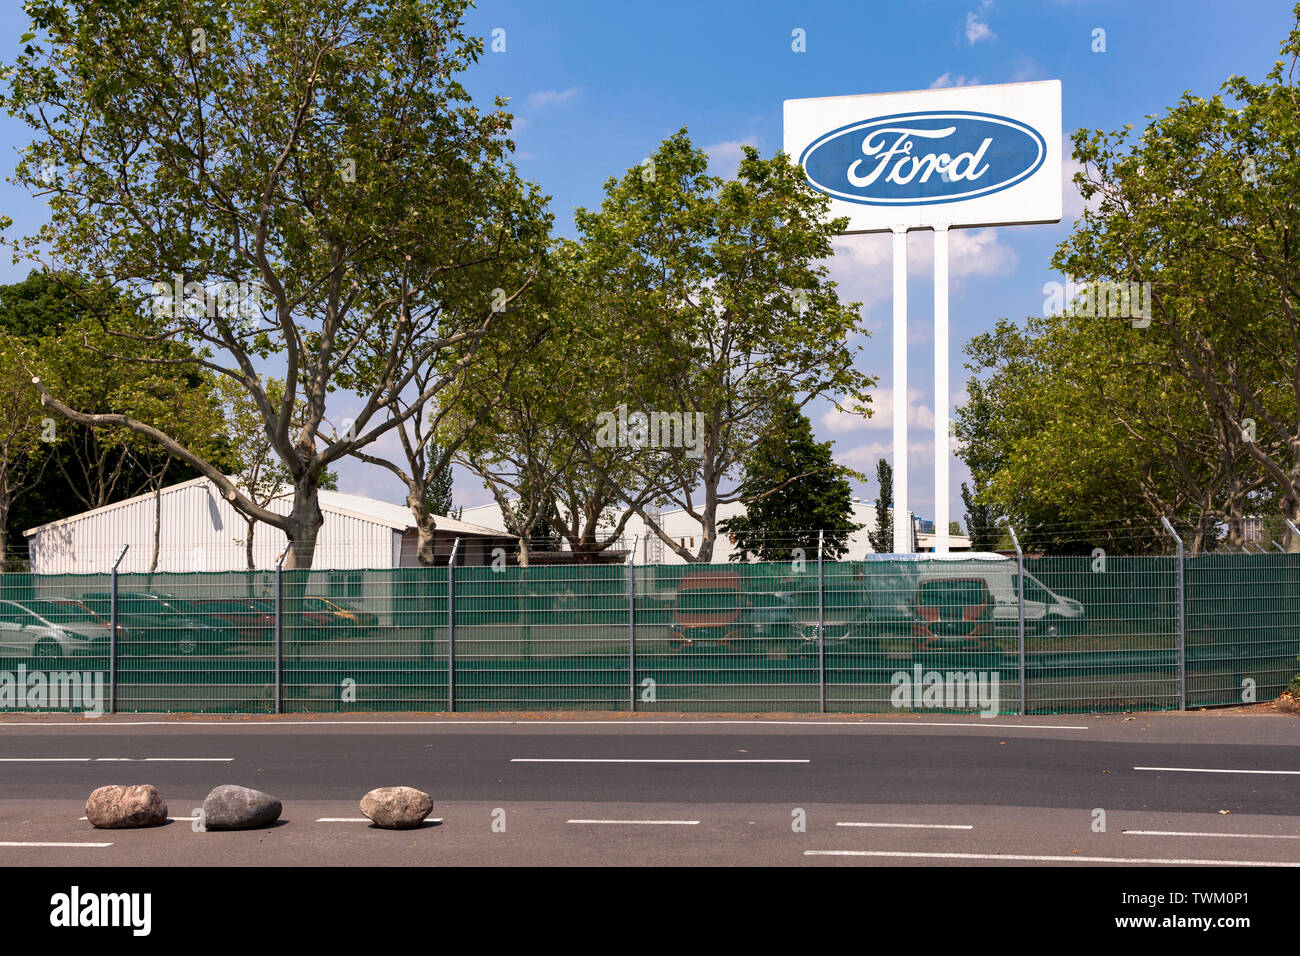 large advertising sign at the Ford automobile factory in the town district Niehl, Cologne, Germany.  grosses Werbeschild an den Ford-Werken in Niehl, Stock Photo